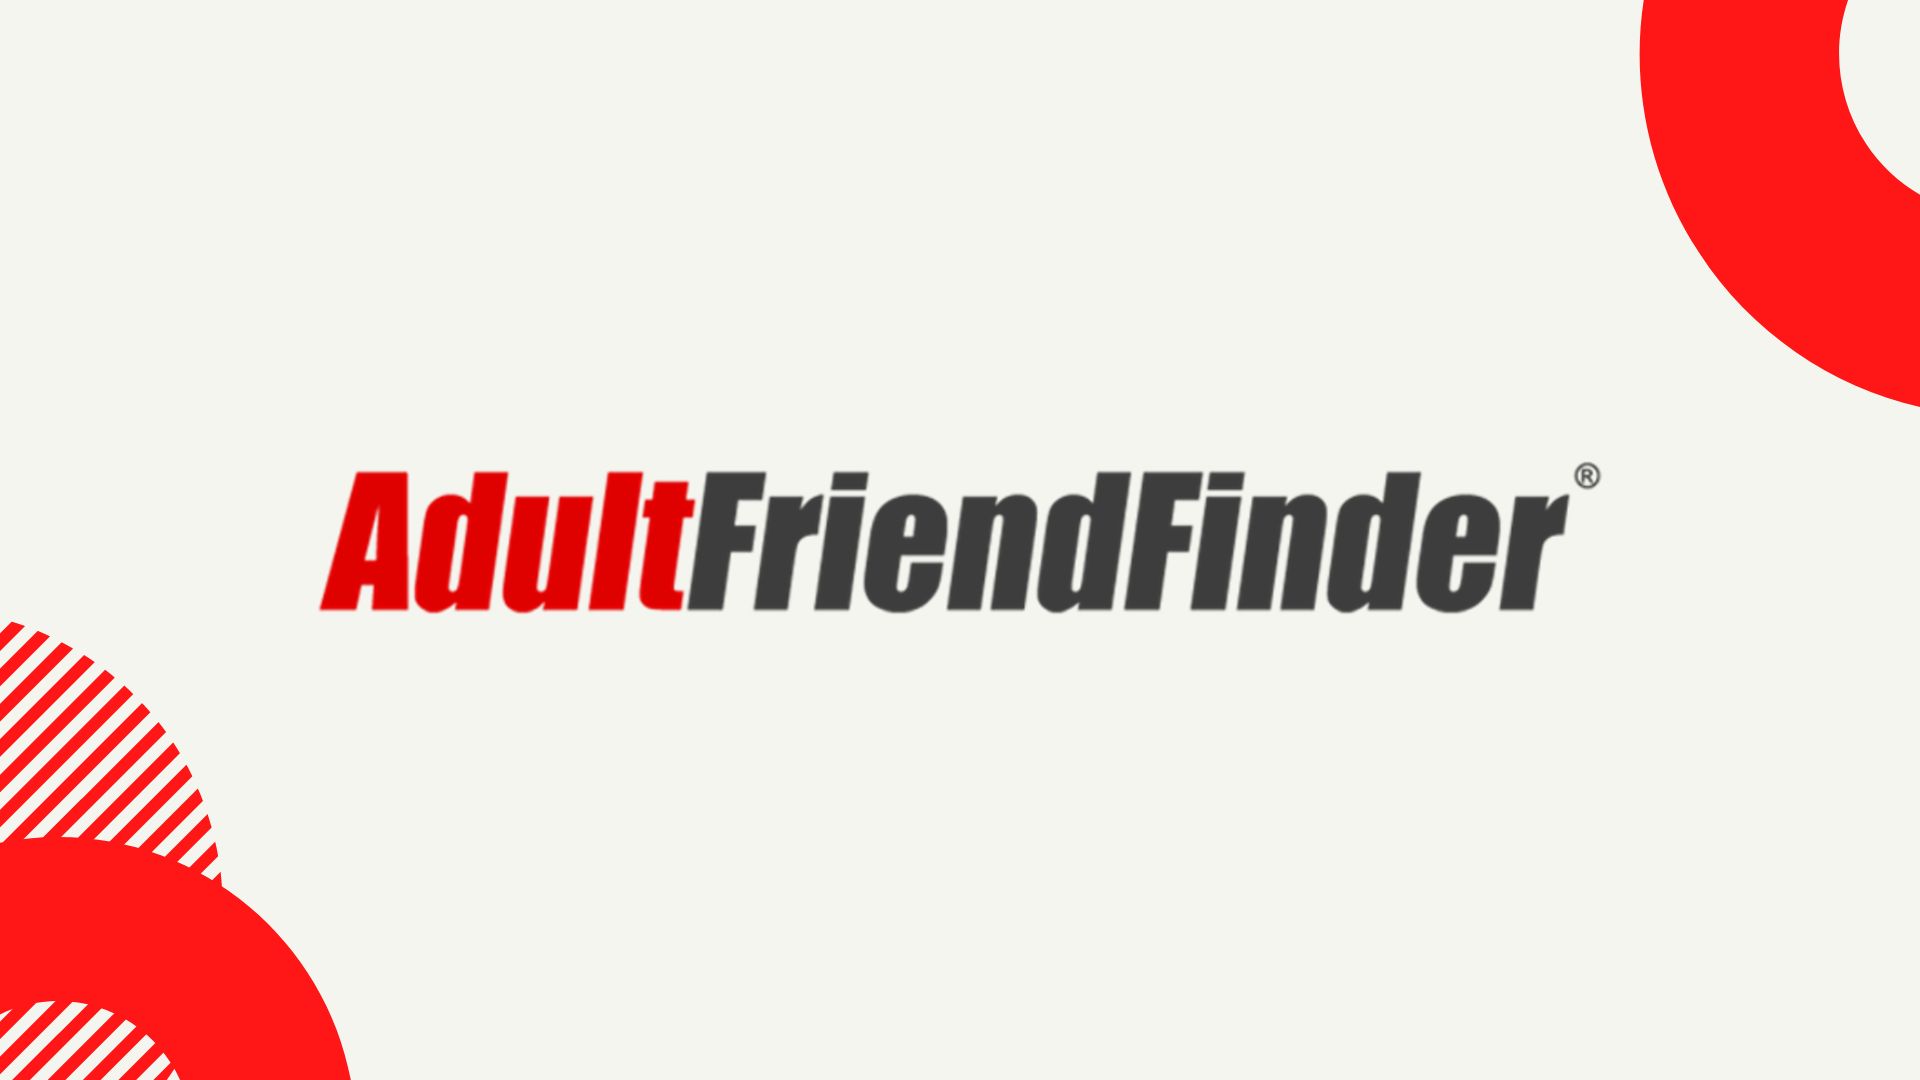 Is Adult Friend Finder Real